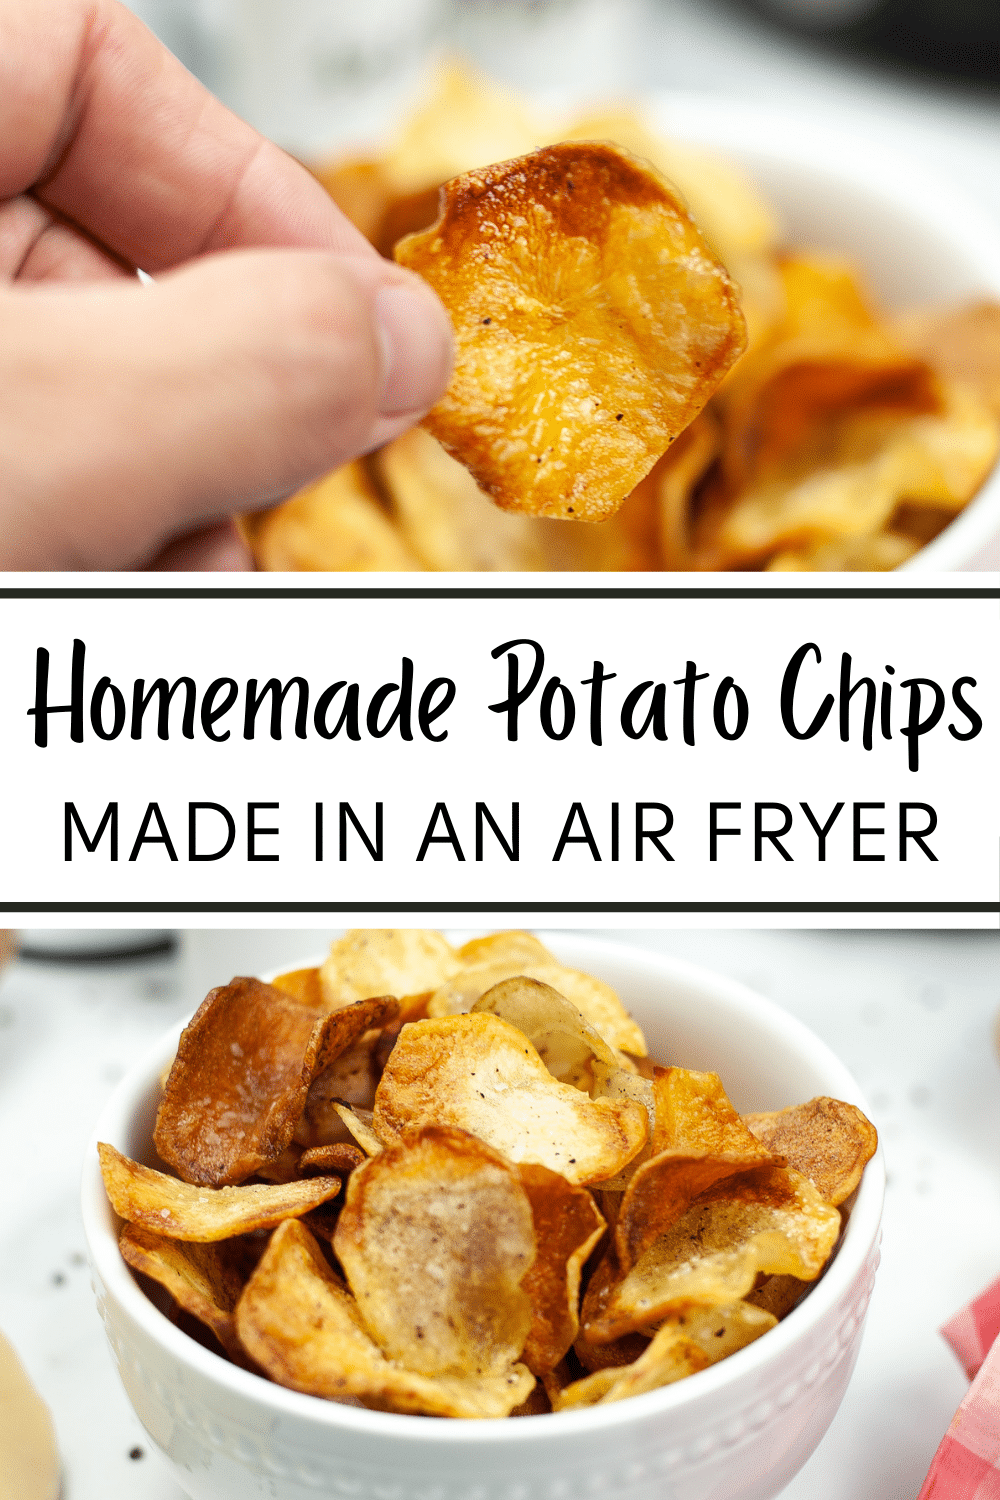 top image is a closeup of a hand holding a potato chip, bottom image is a closeup of potato chips in a white bowl, with title text in between reading Homemade Potato Chips Made In An Air Fryer